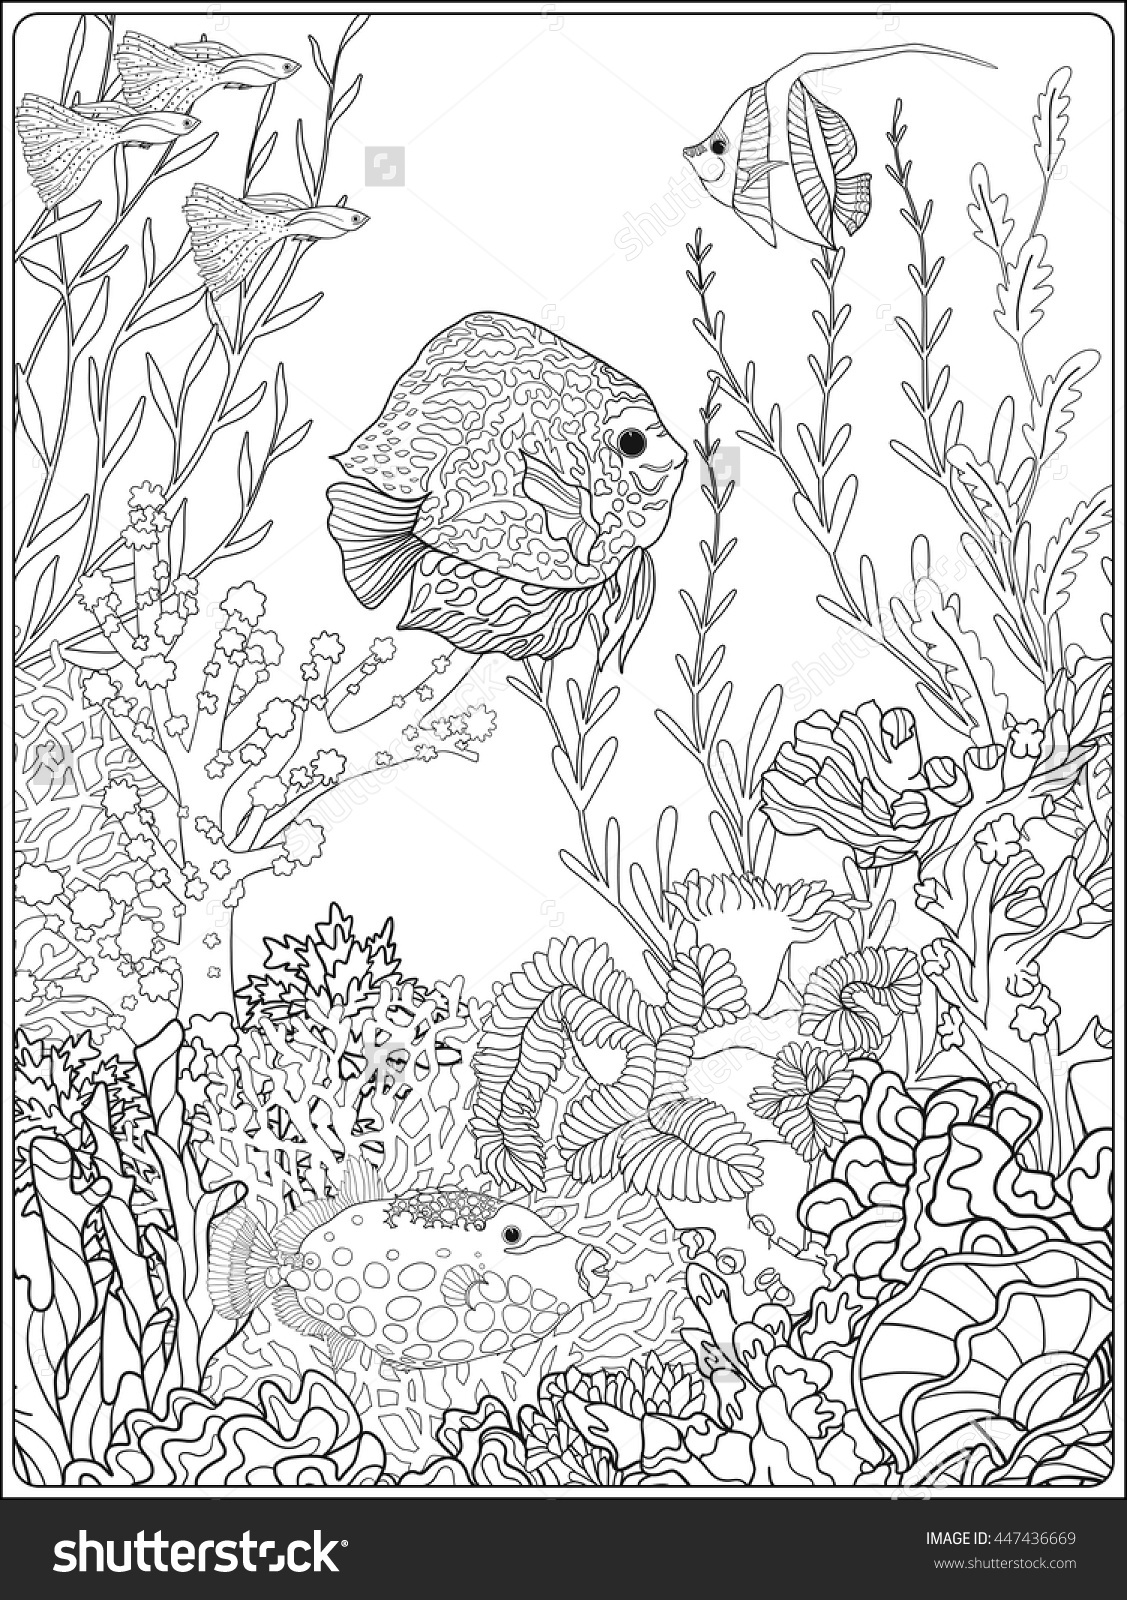 Sea World Coloring Pages at GetColorings.com | Free printable colorings